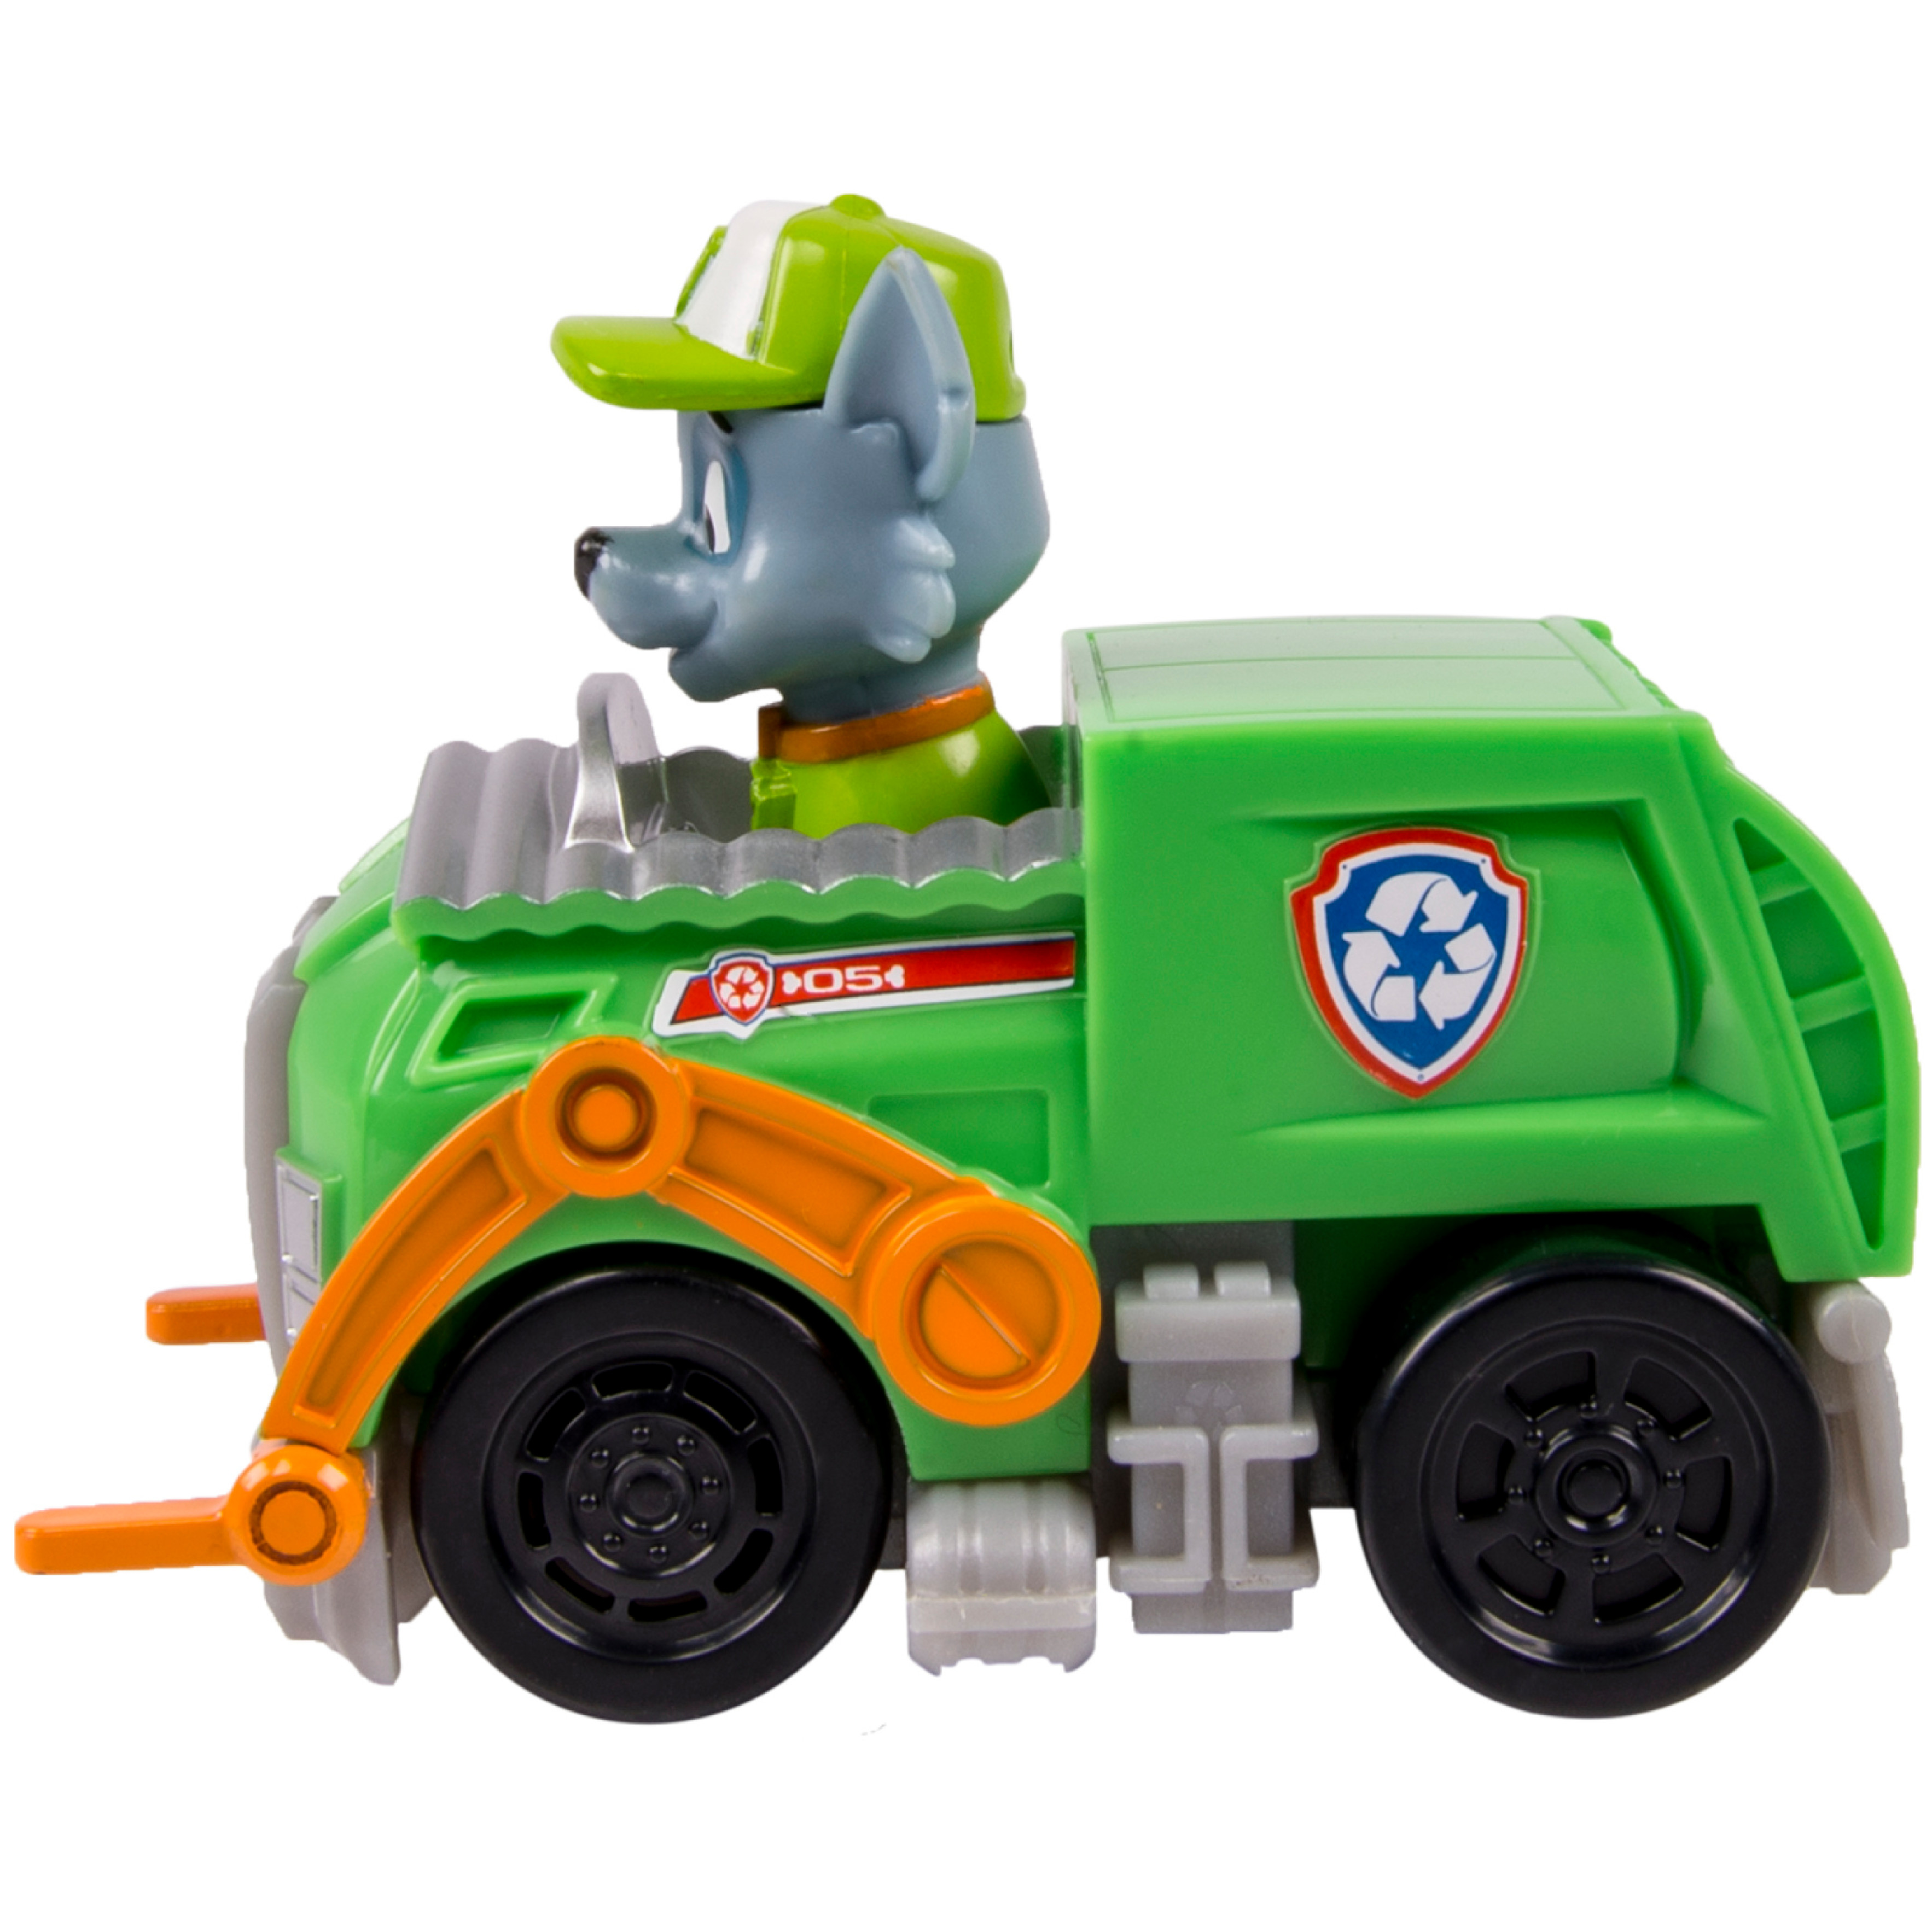 PAW Patrol Rescue Racers 3-Pack Vehicle with Figure Set - image 4 of 6